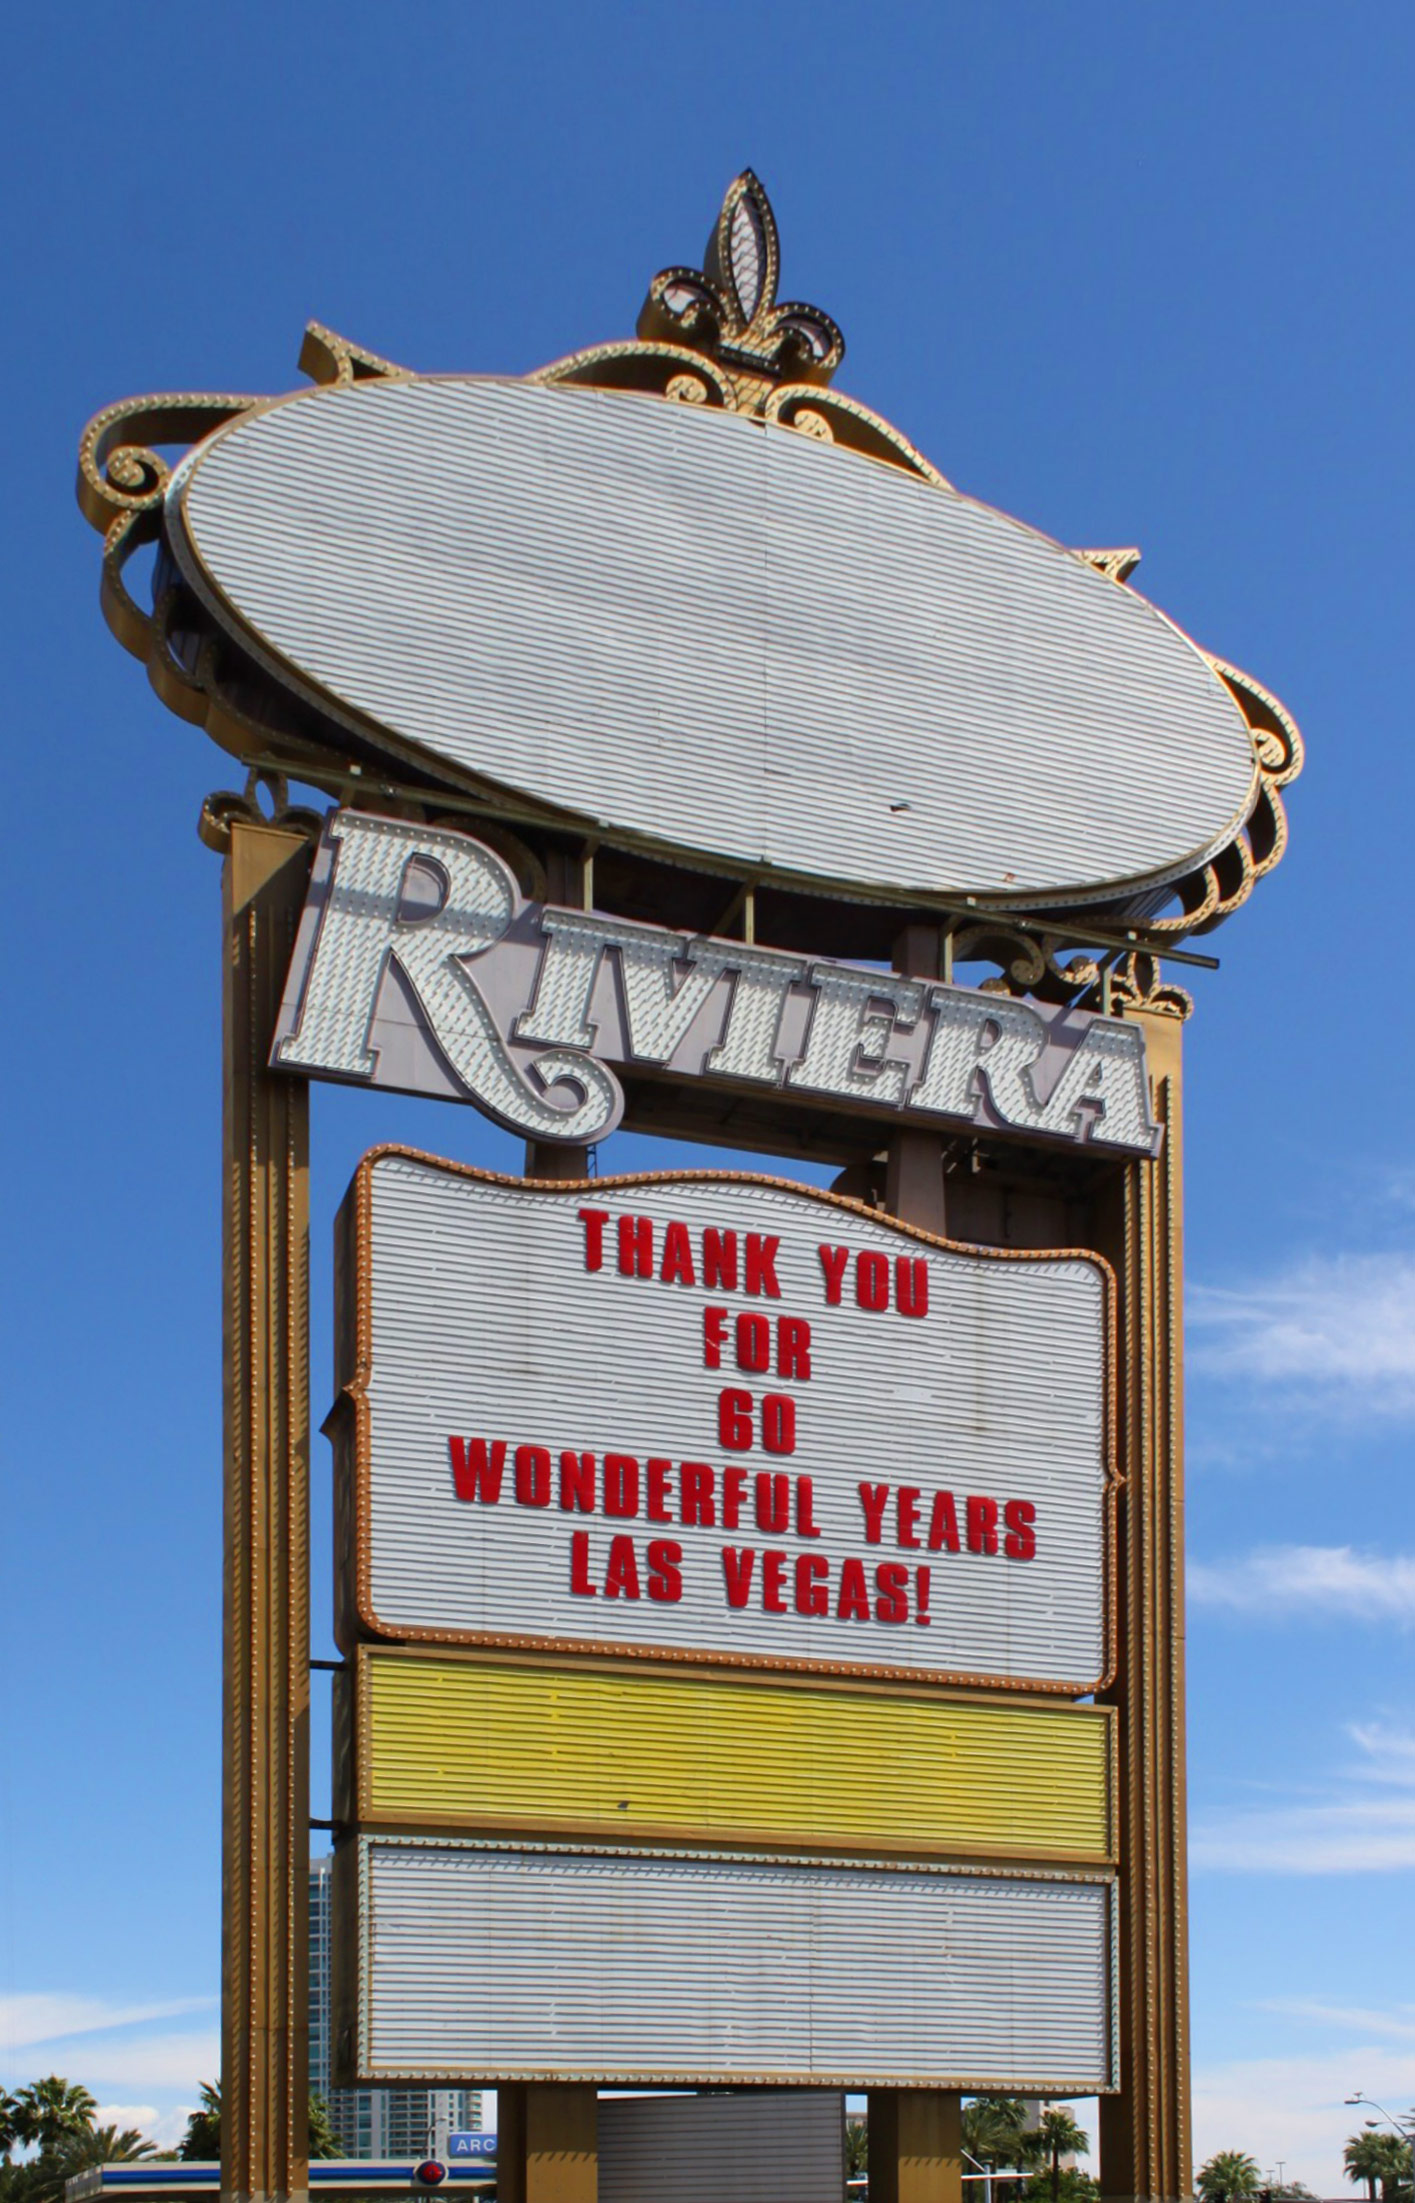 Riviera casino closes after 60 years on Vegas Strip with guests